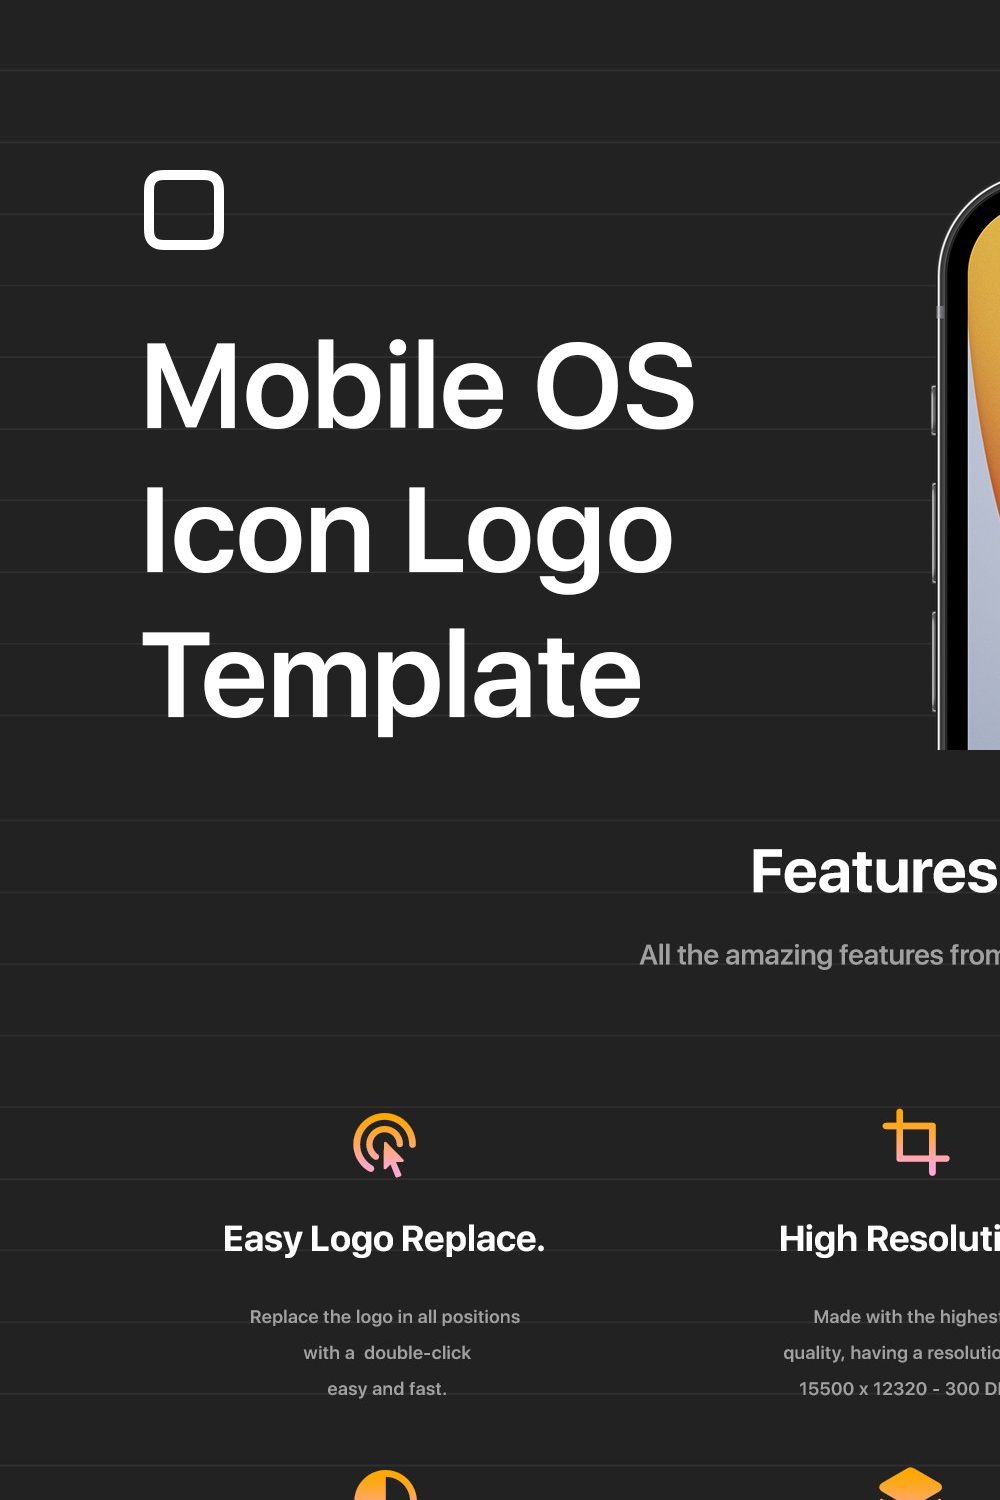 Mobile OS Icon Template Mockup - PSD pinterest preview image.